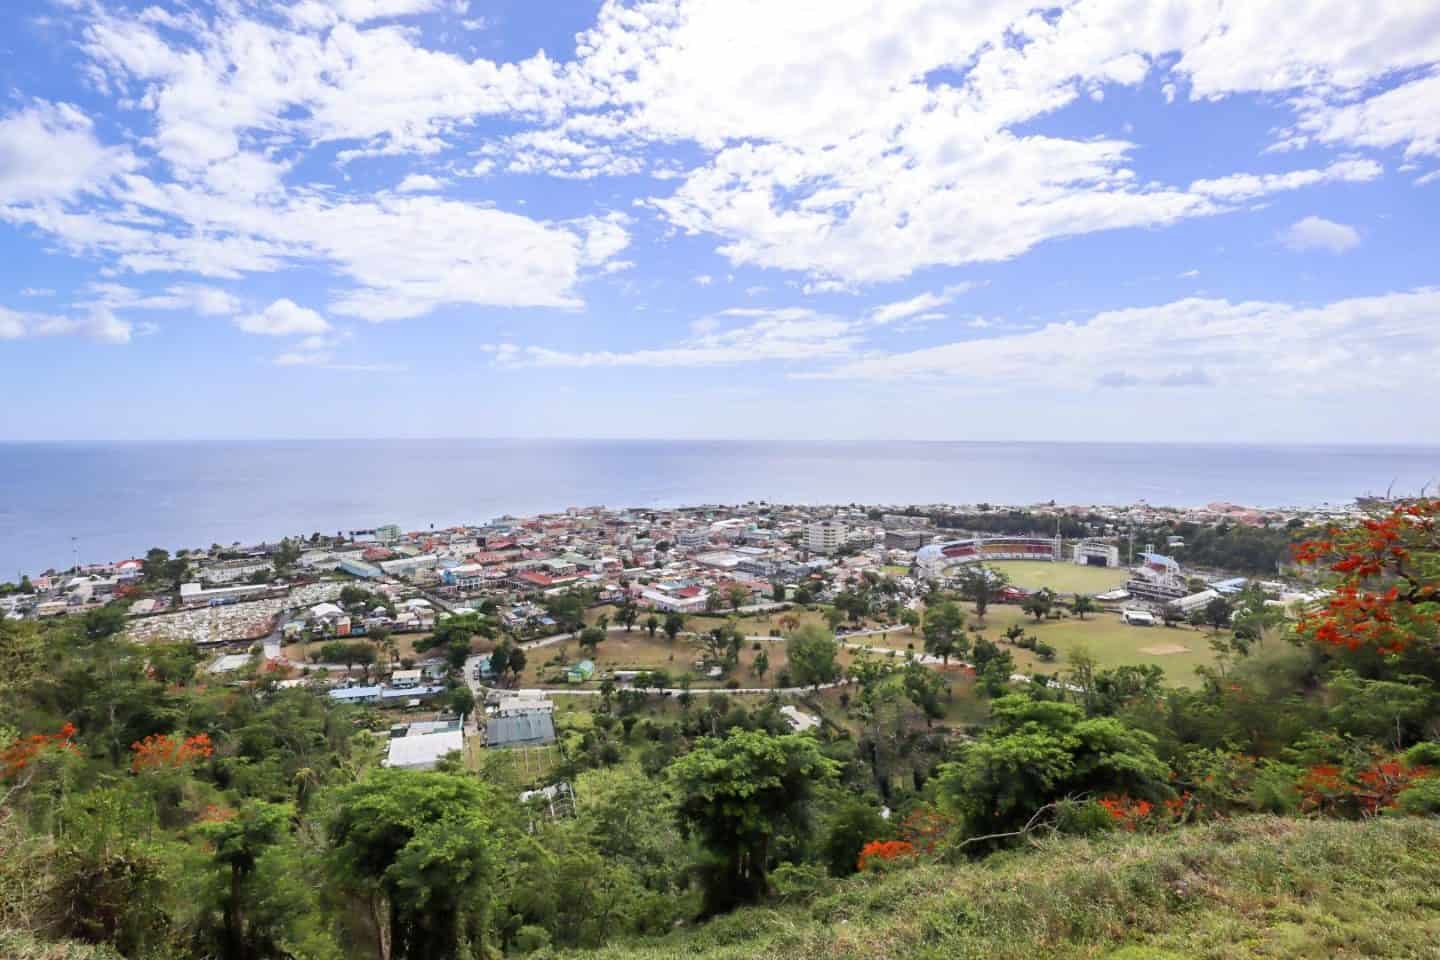 things to do in Dominica, Morne Bruce Viewpoint looking over Roseau City Dominica and Ocean